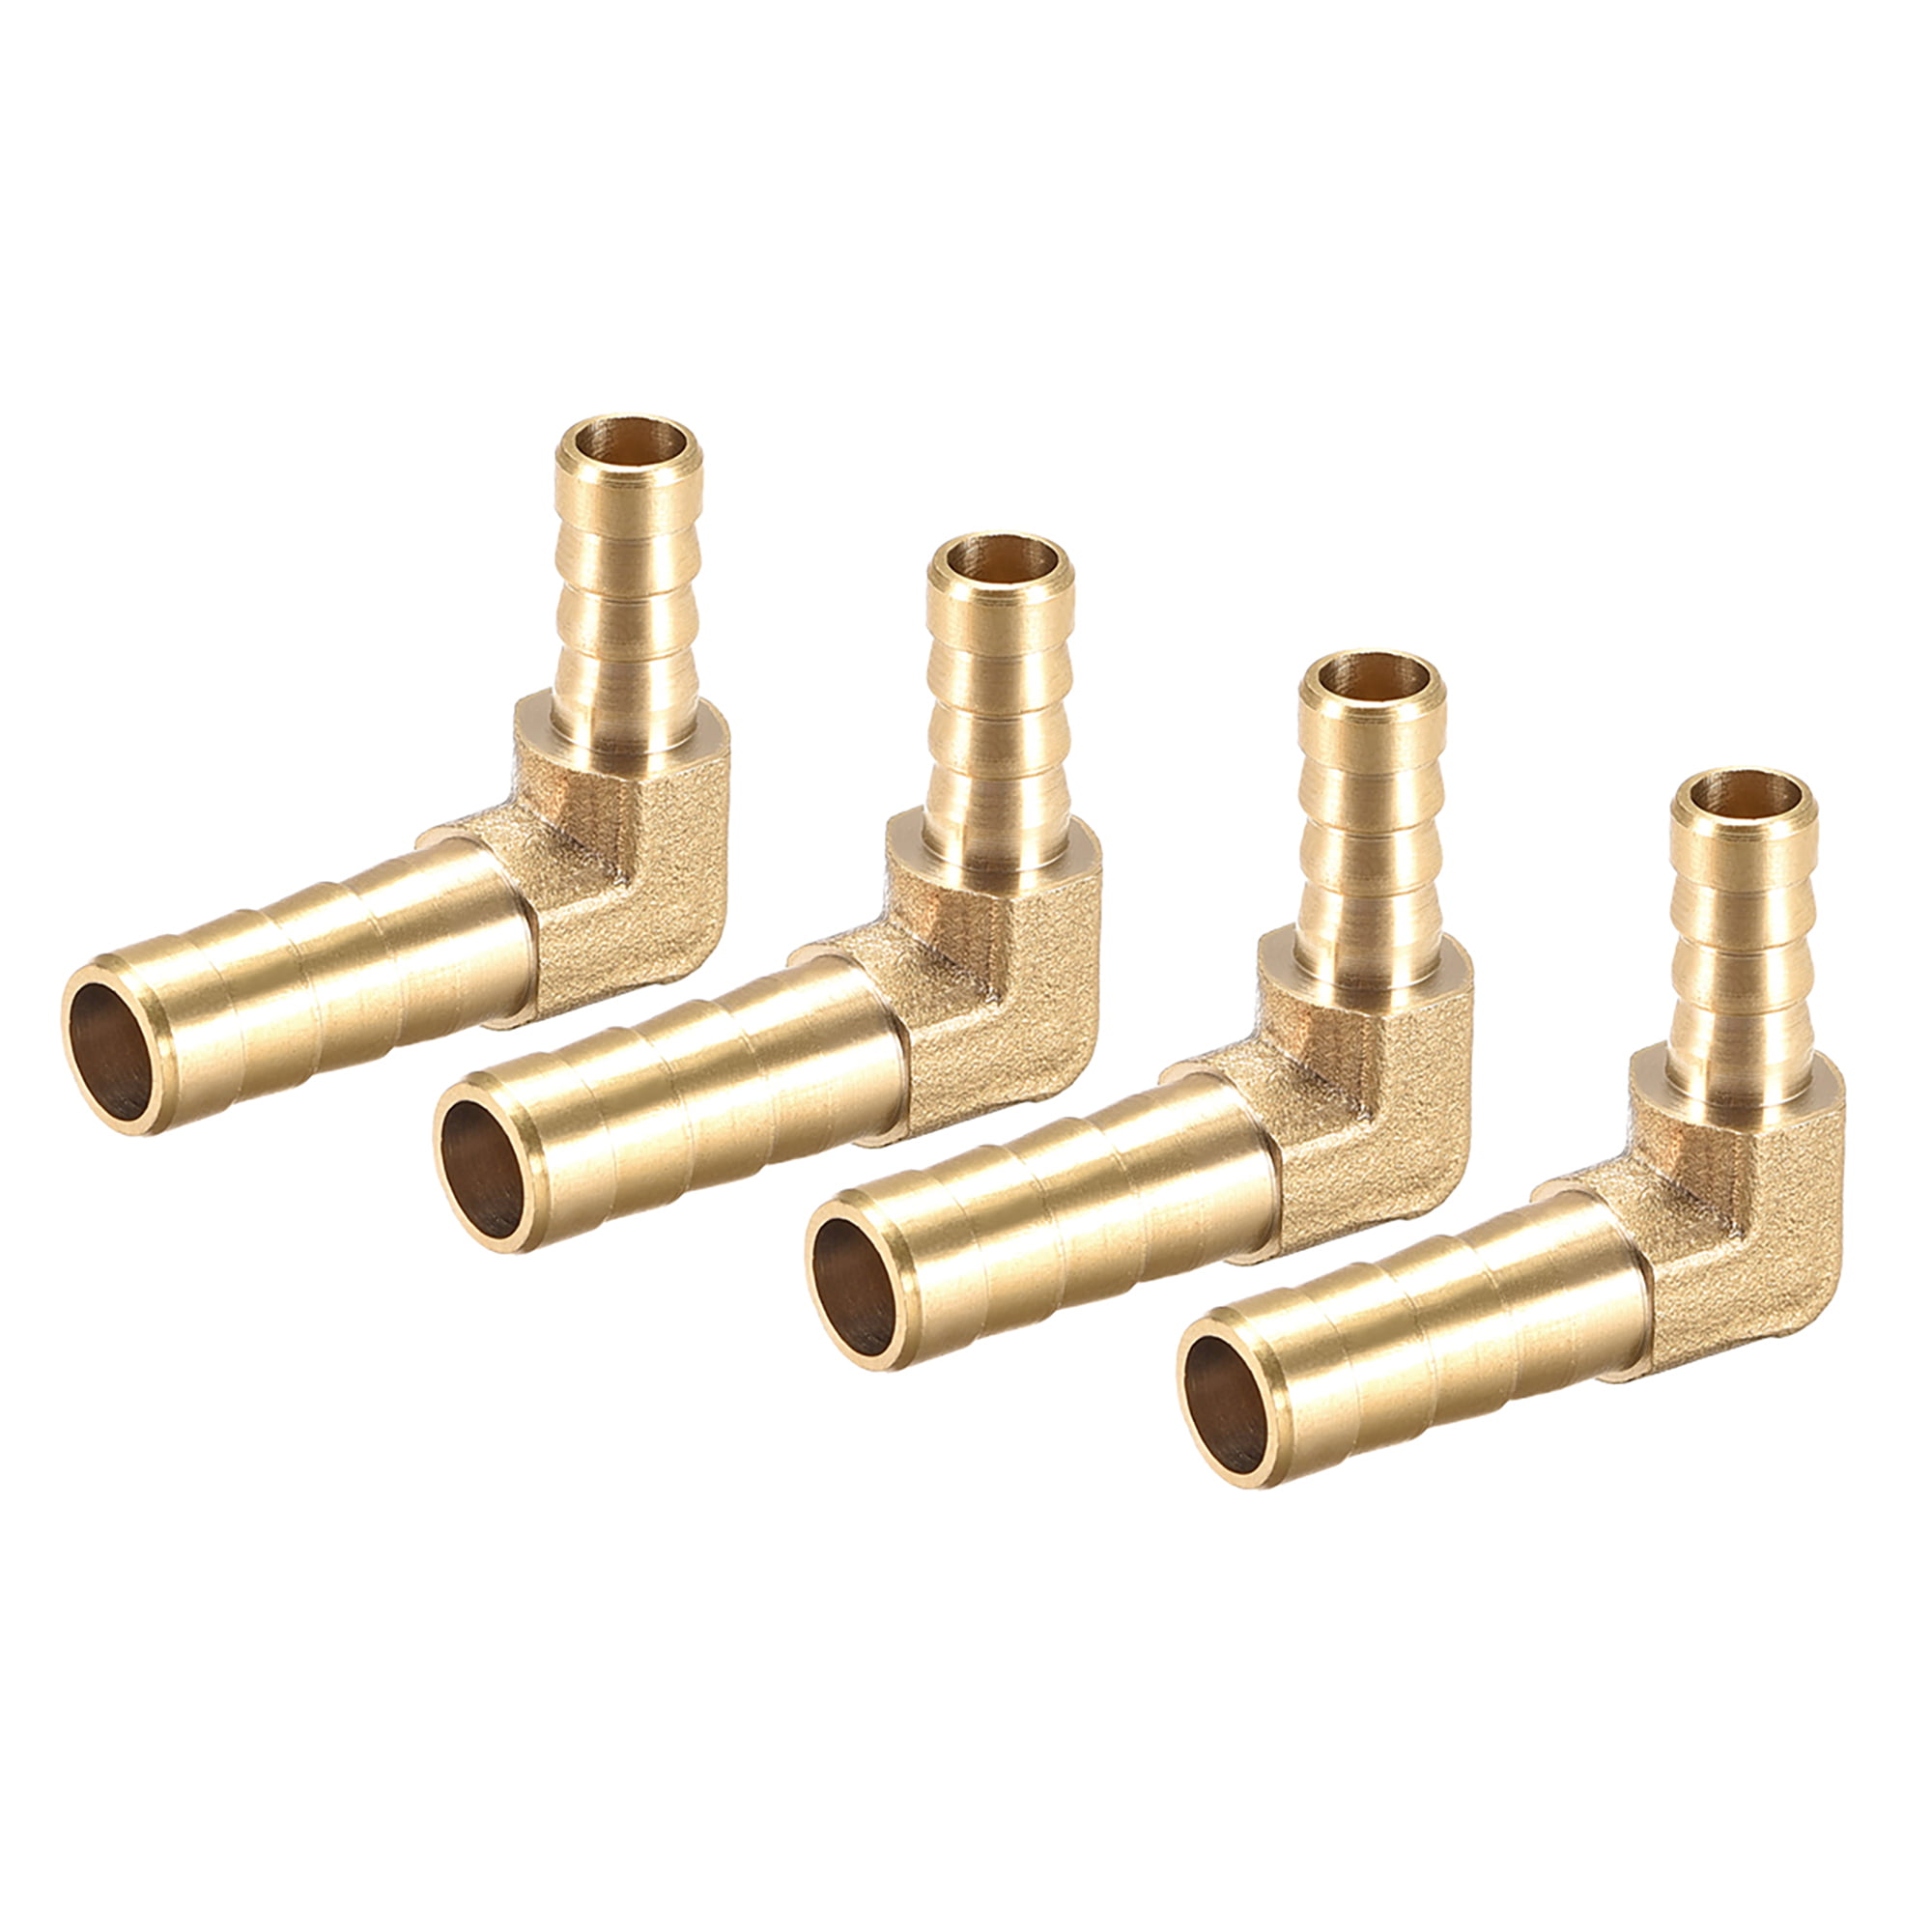 6mm Brass Barbed 90 Degree Elbow Fuel Gas Air Water Hose Joiner Adapter Fitting 